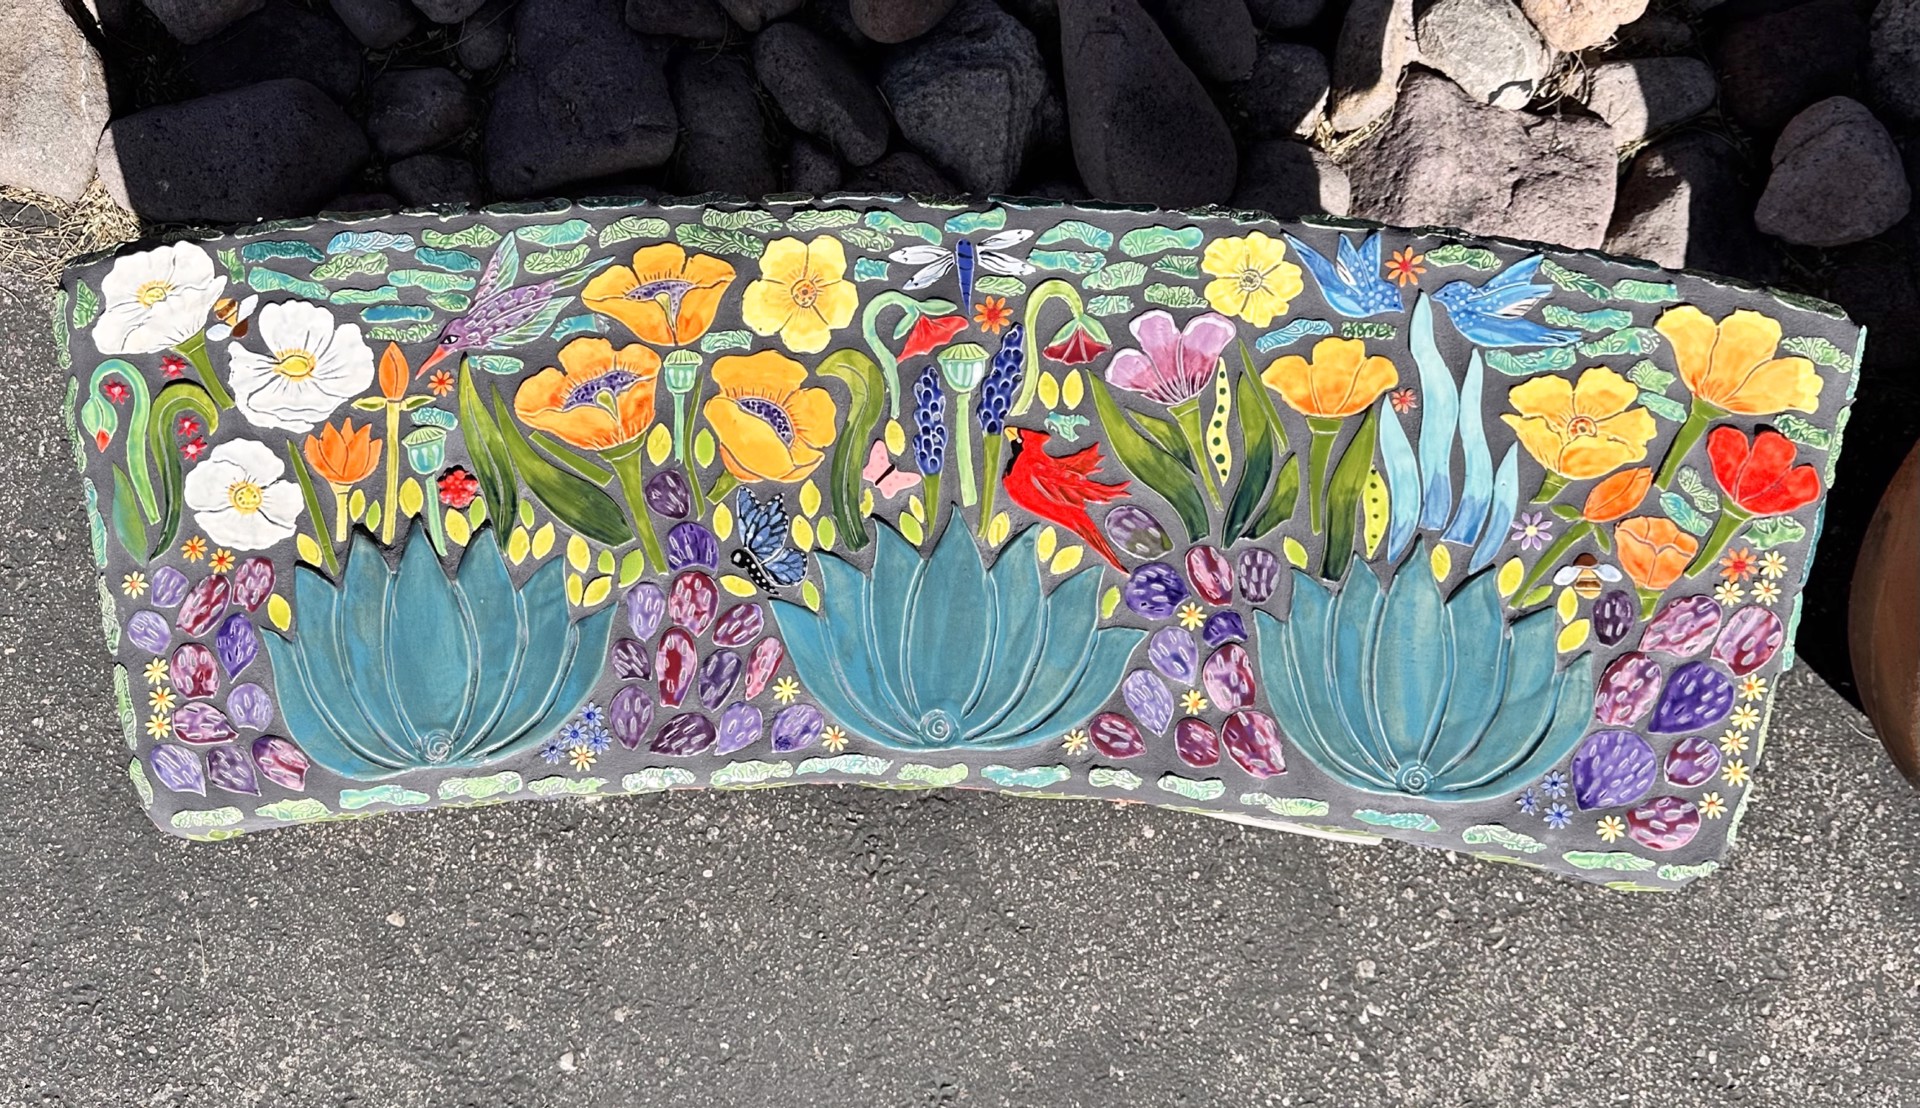 Bench - Teal Garden Bench with Agave, Poppies and Cardinals by Robin Chlad